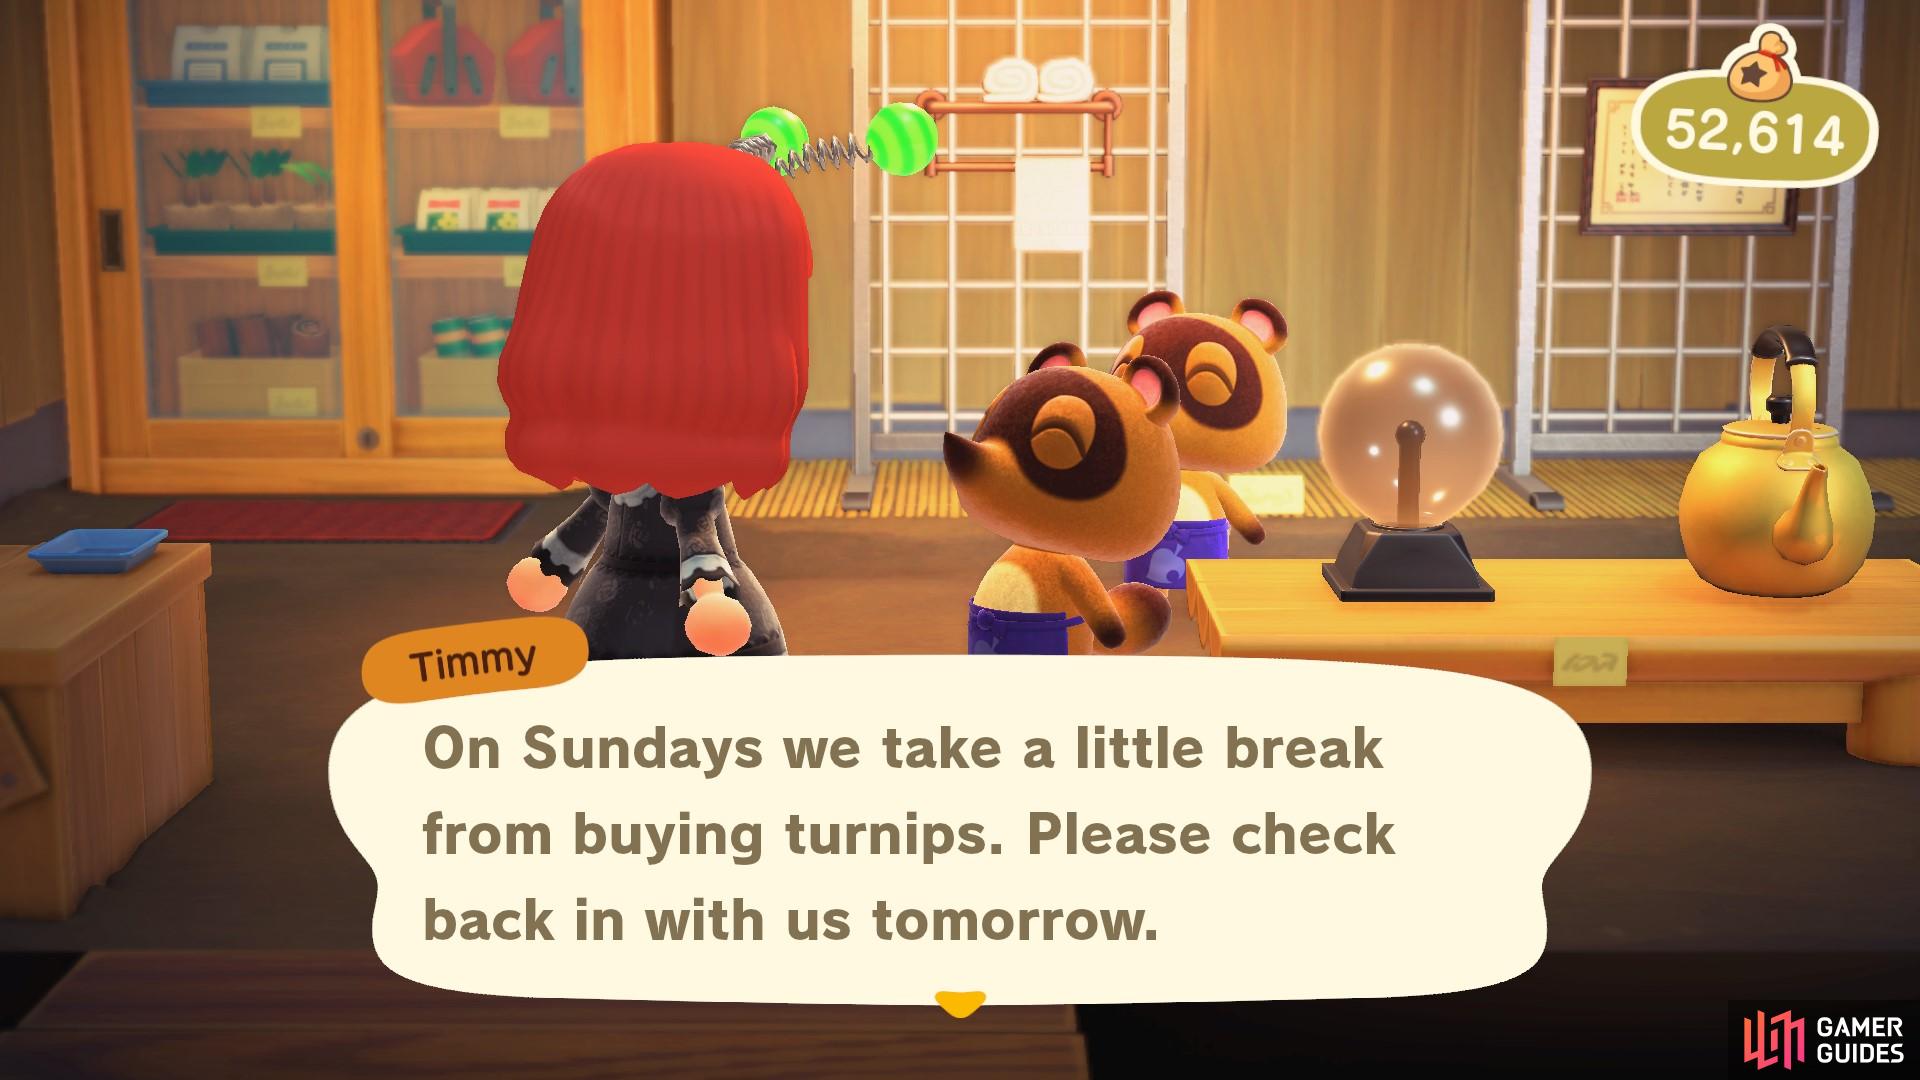 You cant sell turnips on Sundays. 